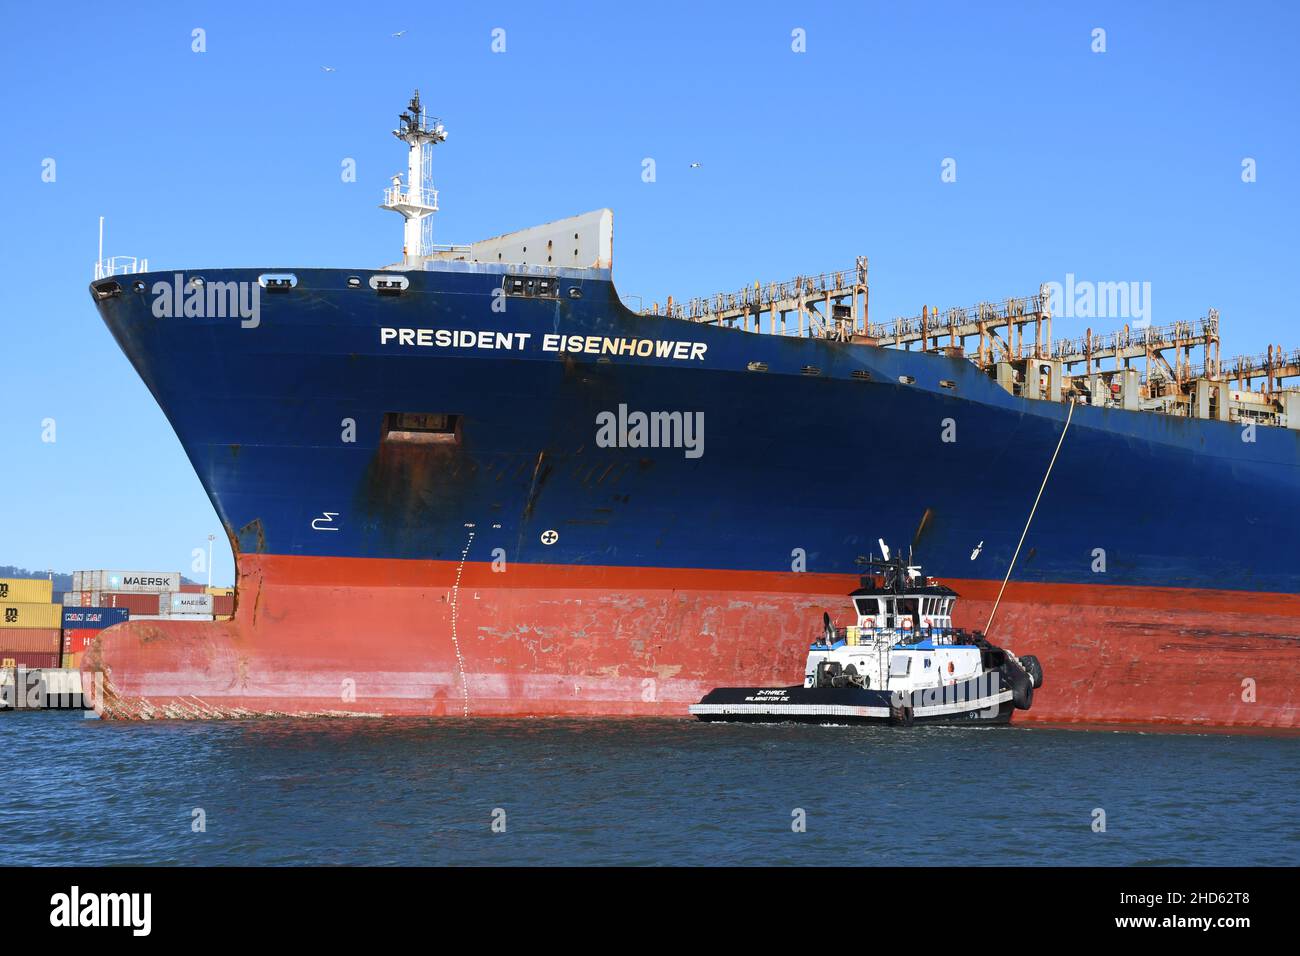 Tugs docking container ship APL President Eisenhower, Port of Oakland. Commercial freight and container ships in San Francisco Bay, California Stock Photo